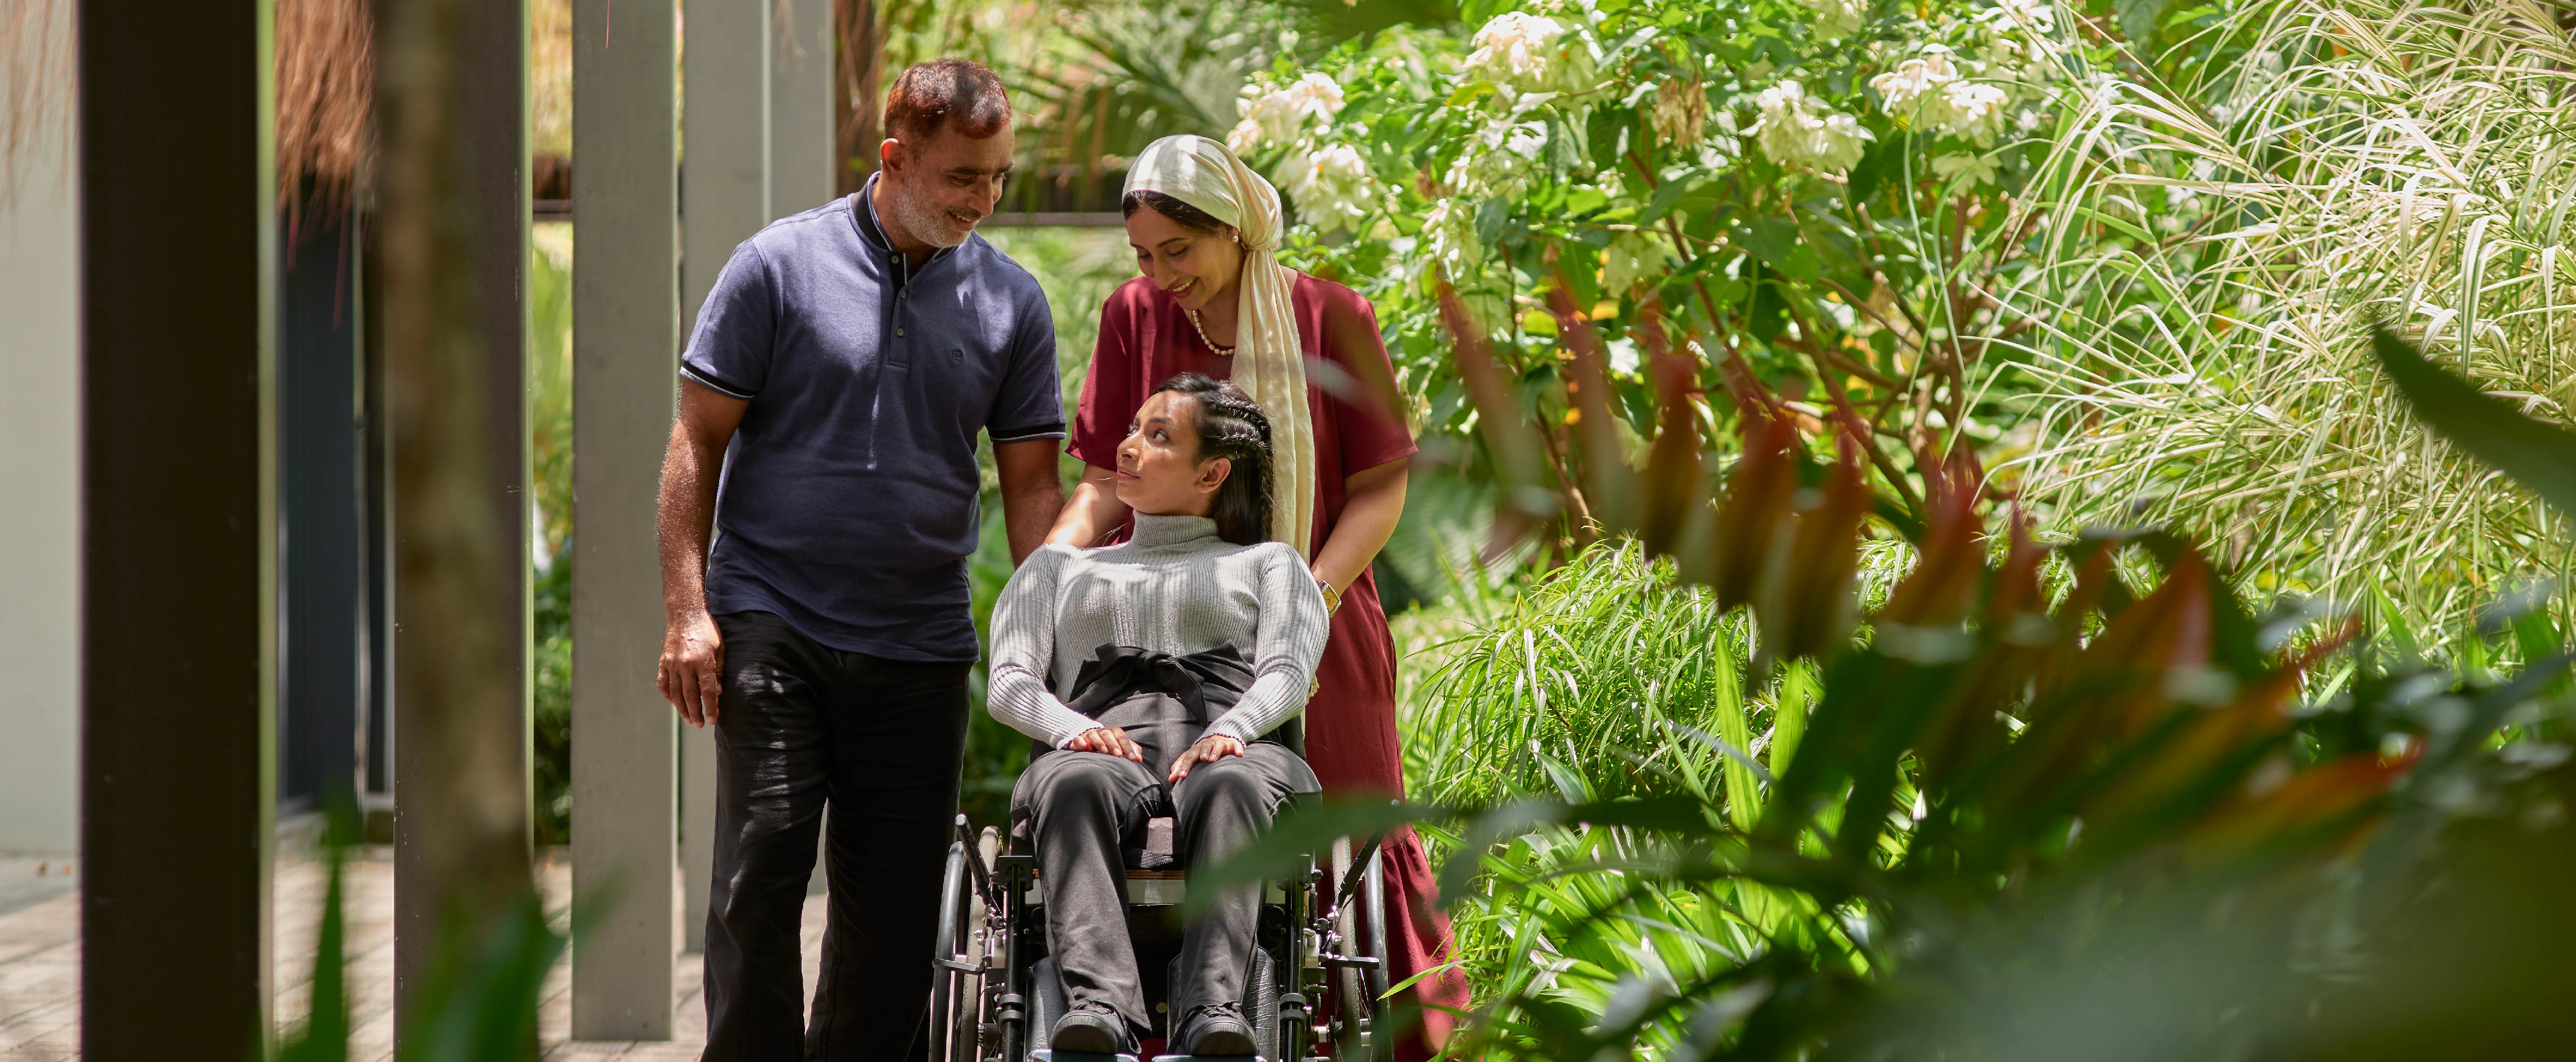 Surrounded by greenery, two caregivers and their care recipient on a wheelchair looks affectionately at one another